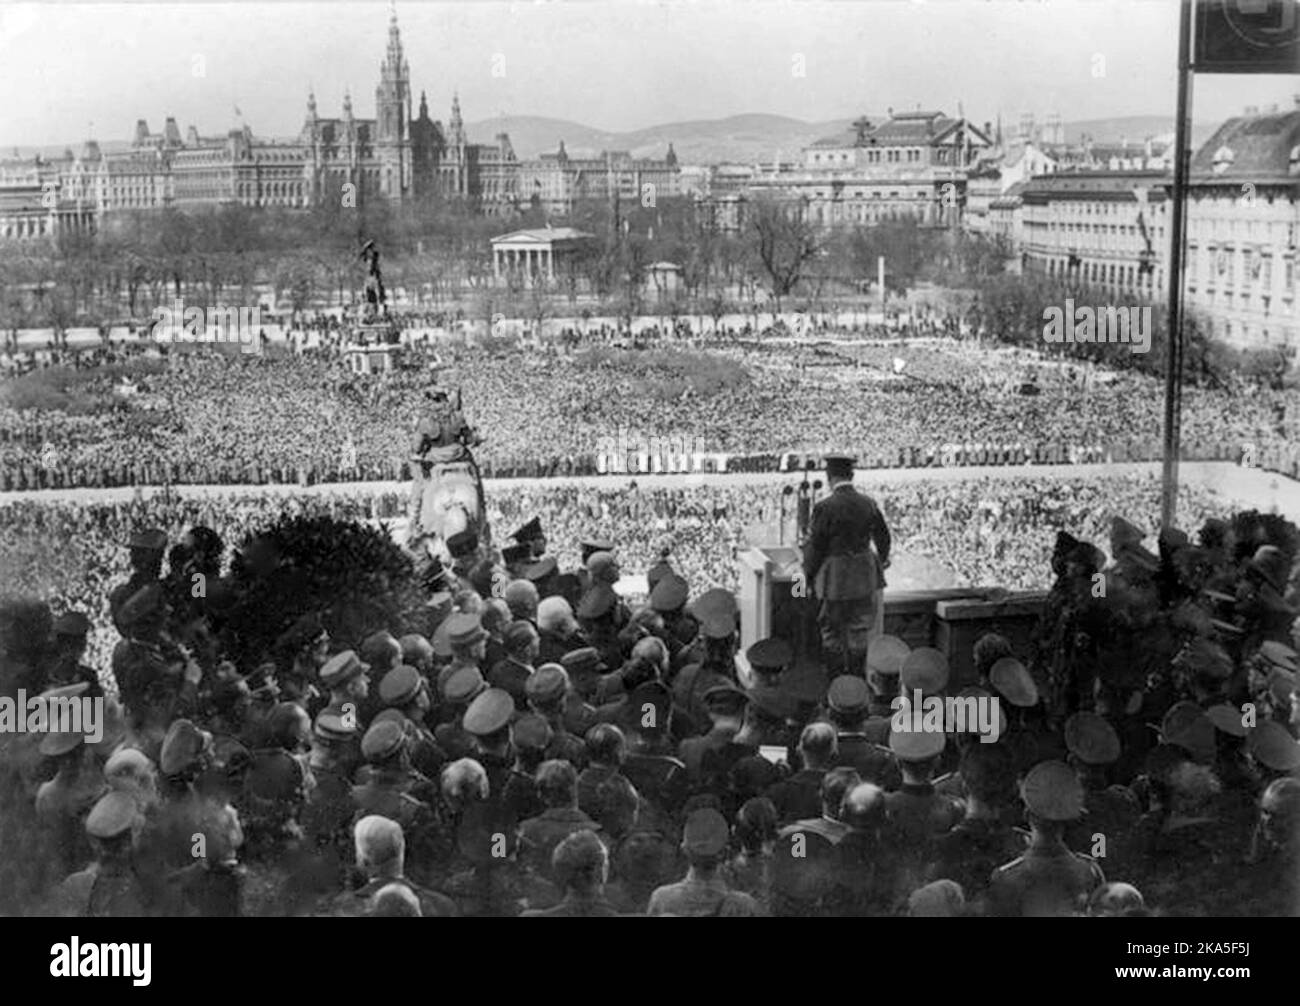 Crowds gather in Vienna to hear Hitler speak after the Anschluss, the formal annexation of Austria by Nazi Germany on 15th March 1938. Photo Bundesarchiv, Bild 183-1987-0922-500 Stock Photo